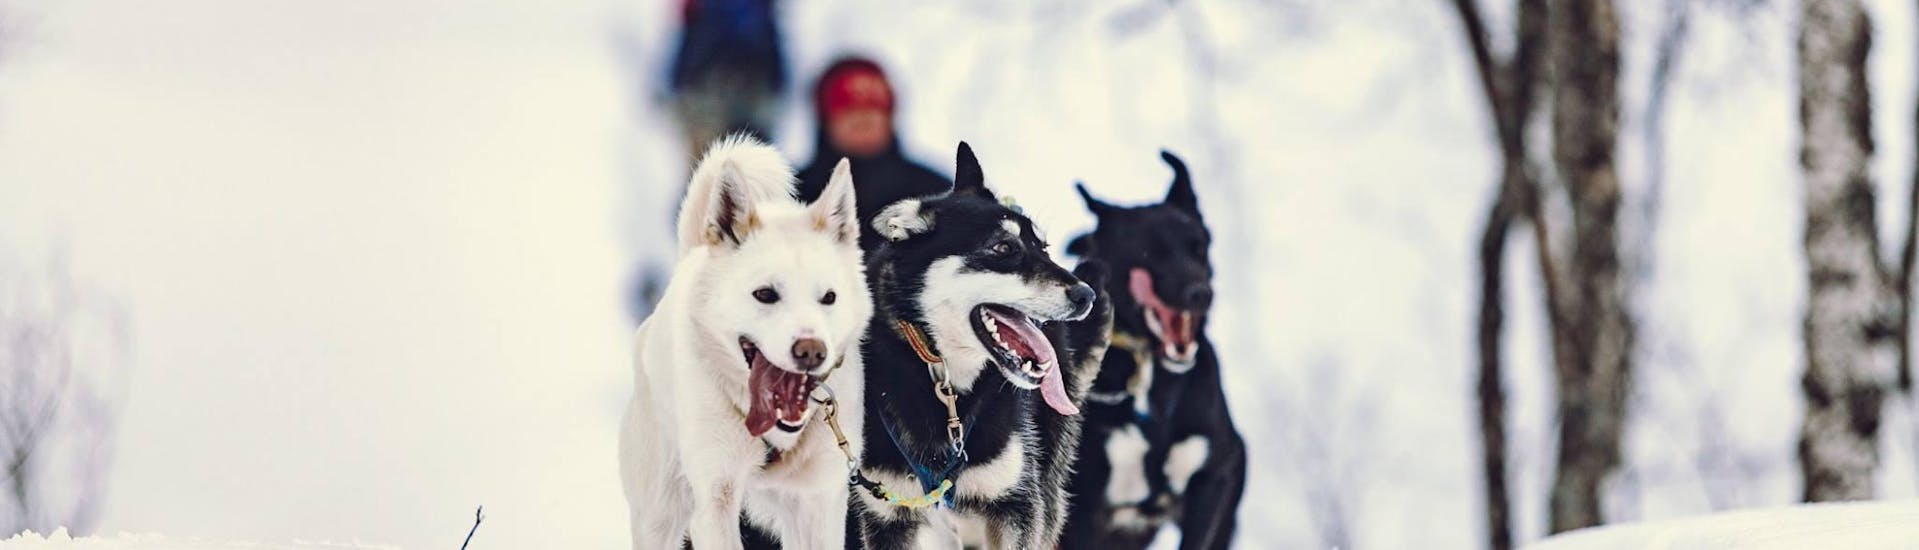 A group of huskies run contentedly through the snow-covered forest with lyngsfjord adventure near tromso